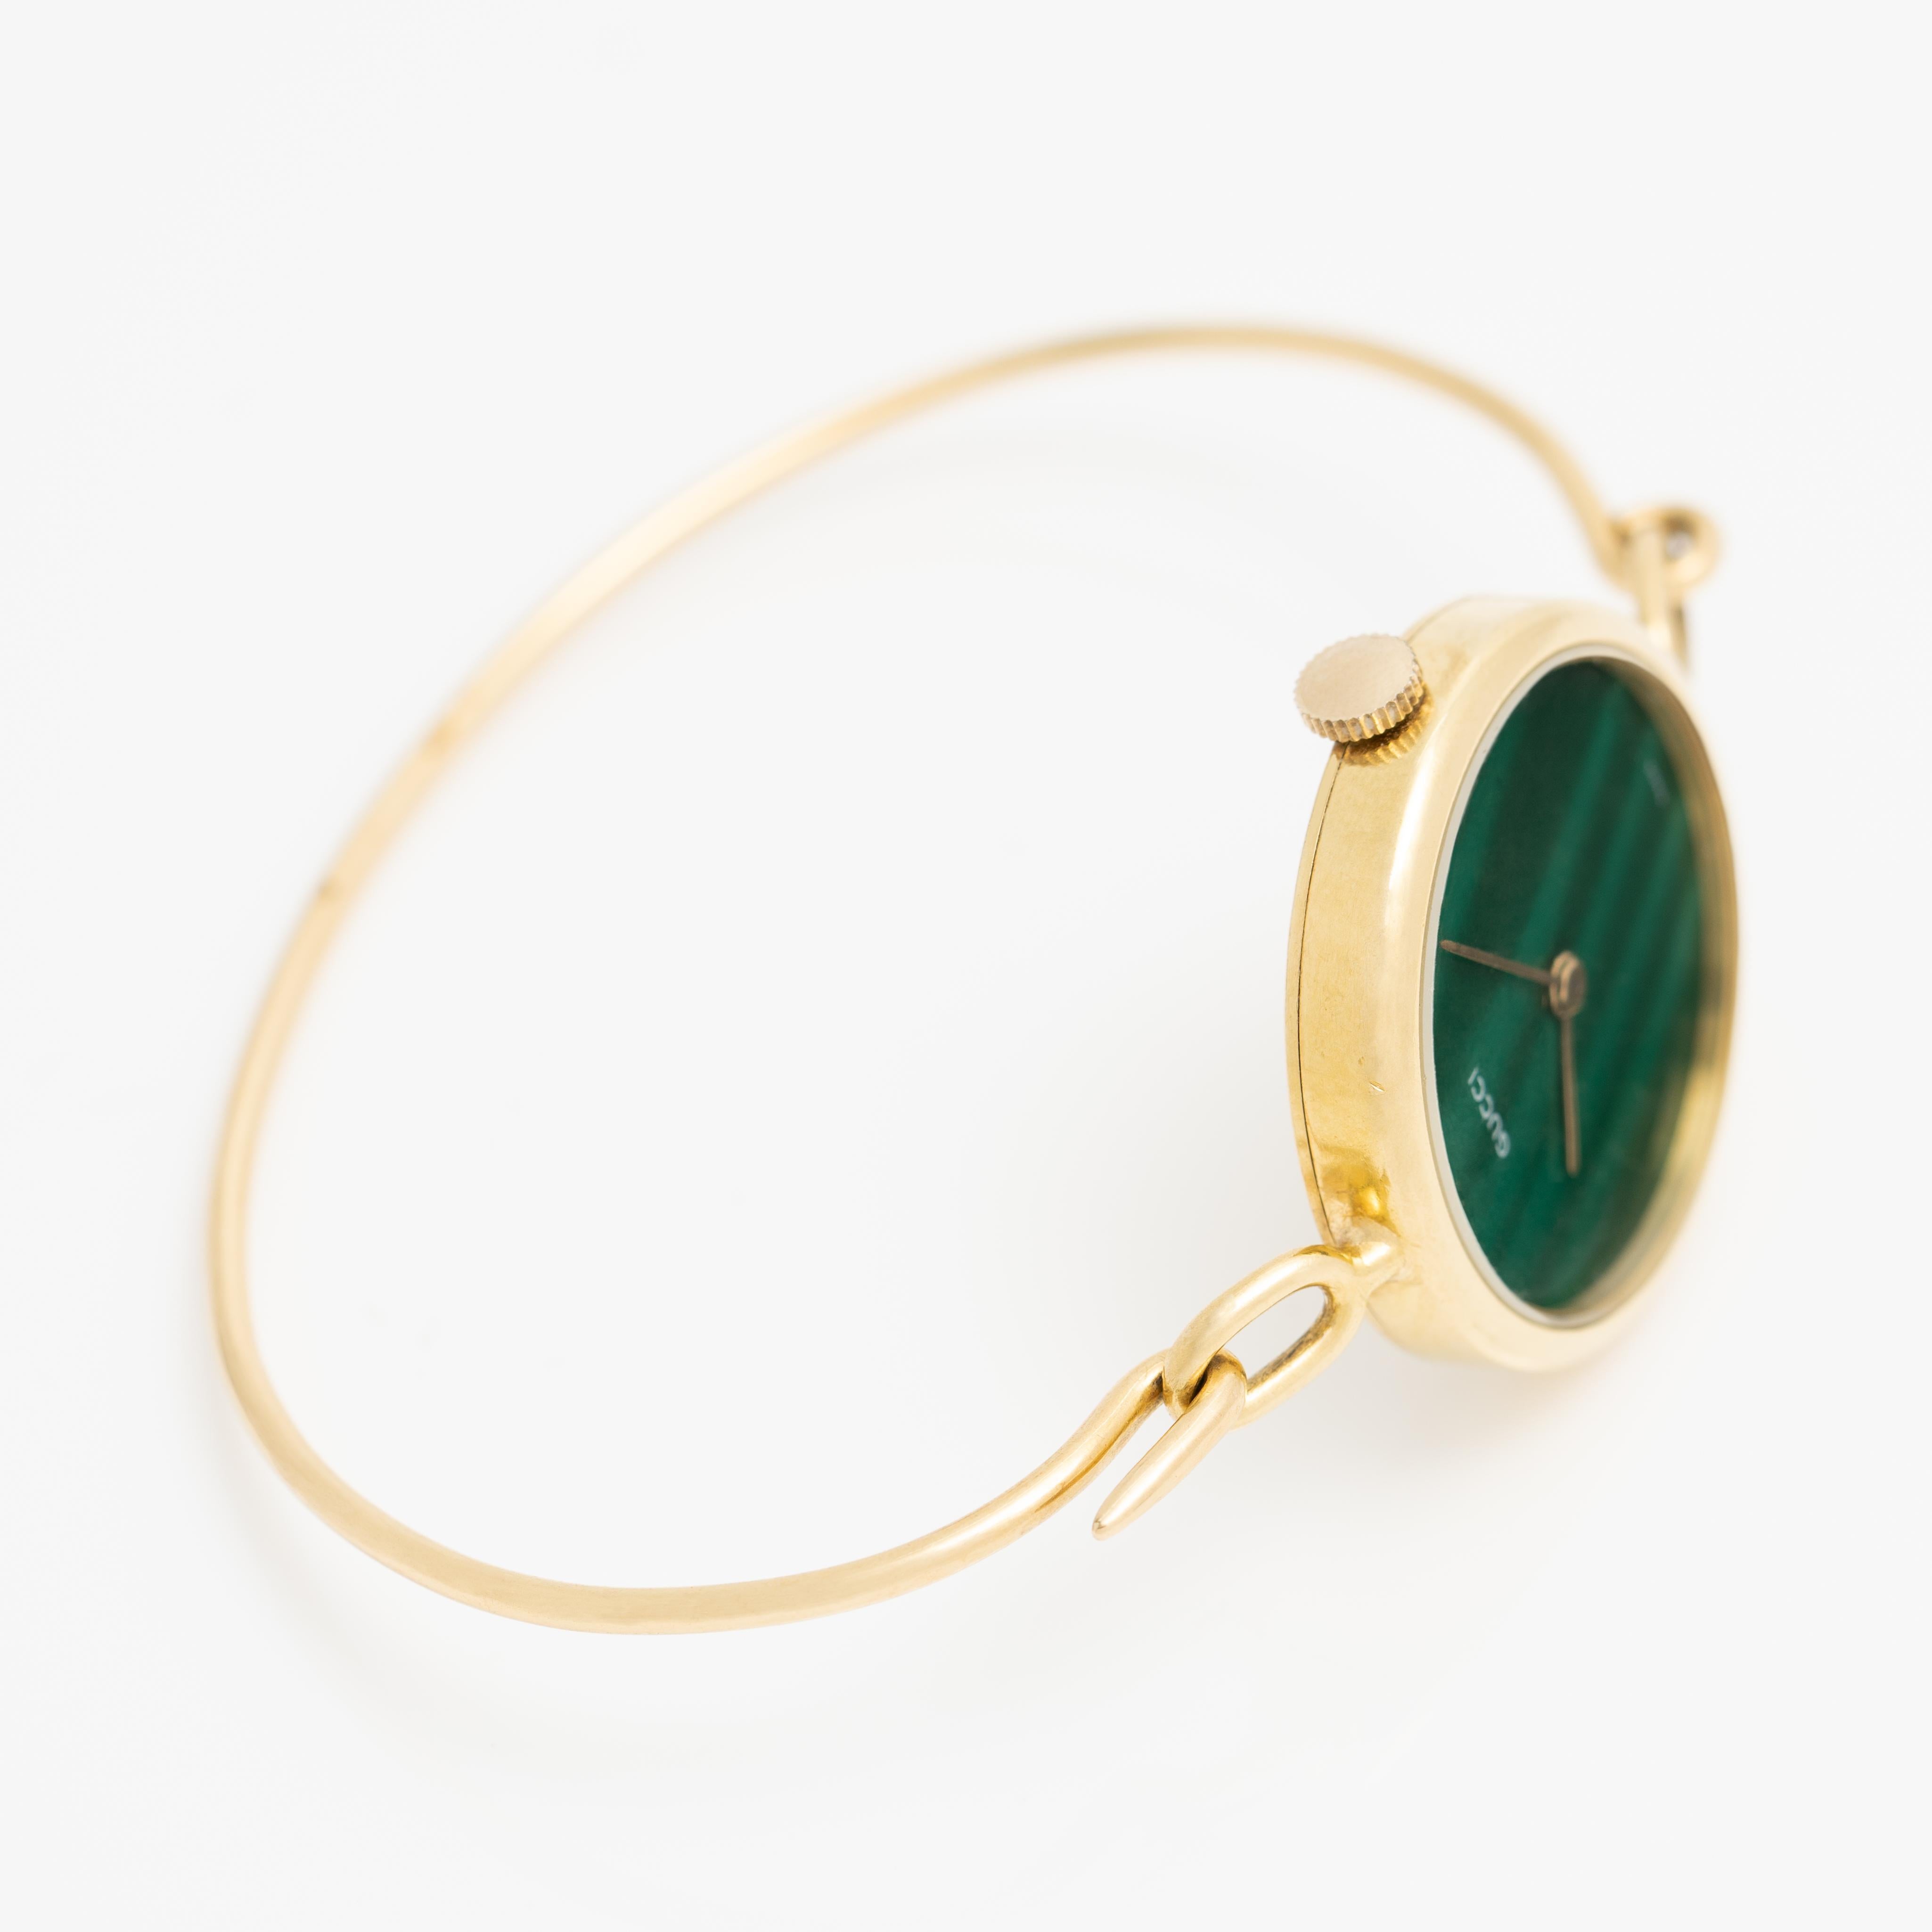 18 Karat Yellow Gold and Malachite Dial Gucci Quartz Movement Watch - 24mm 

Fits up to a 6.5